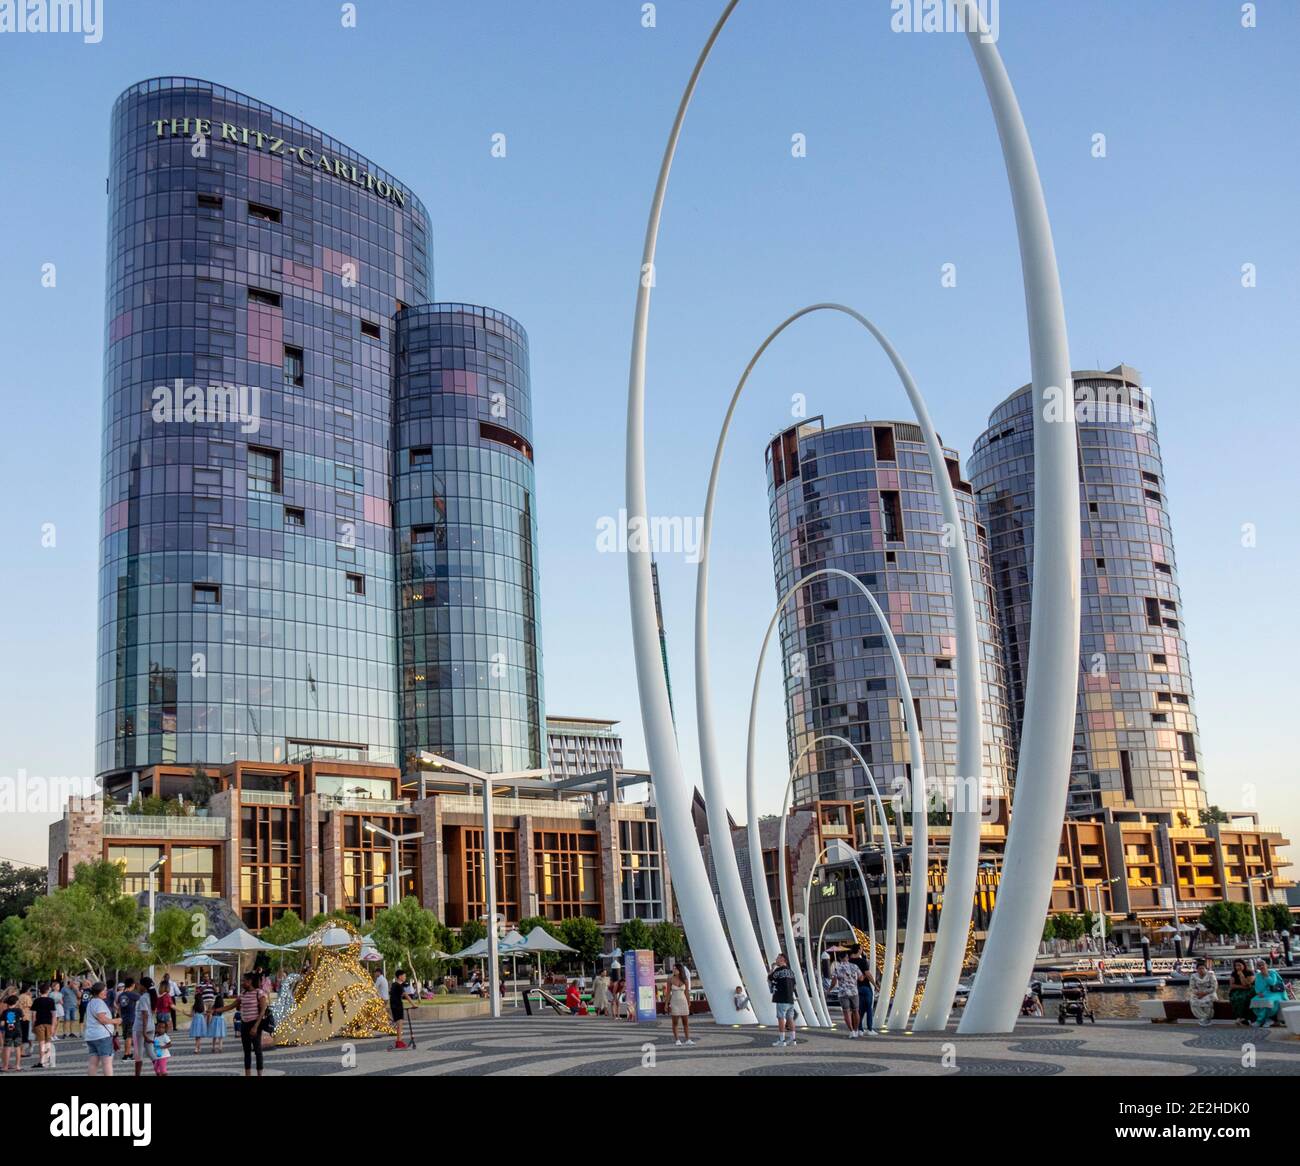 Ritz-Carlton Hotel and high rise residential towers and sculpture Spanda at Elizabeth Quay The Esplanade Perth Western Australia Stock Photo